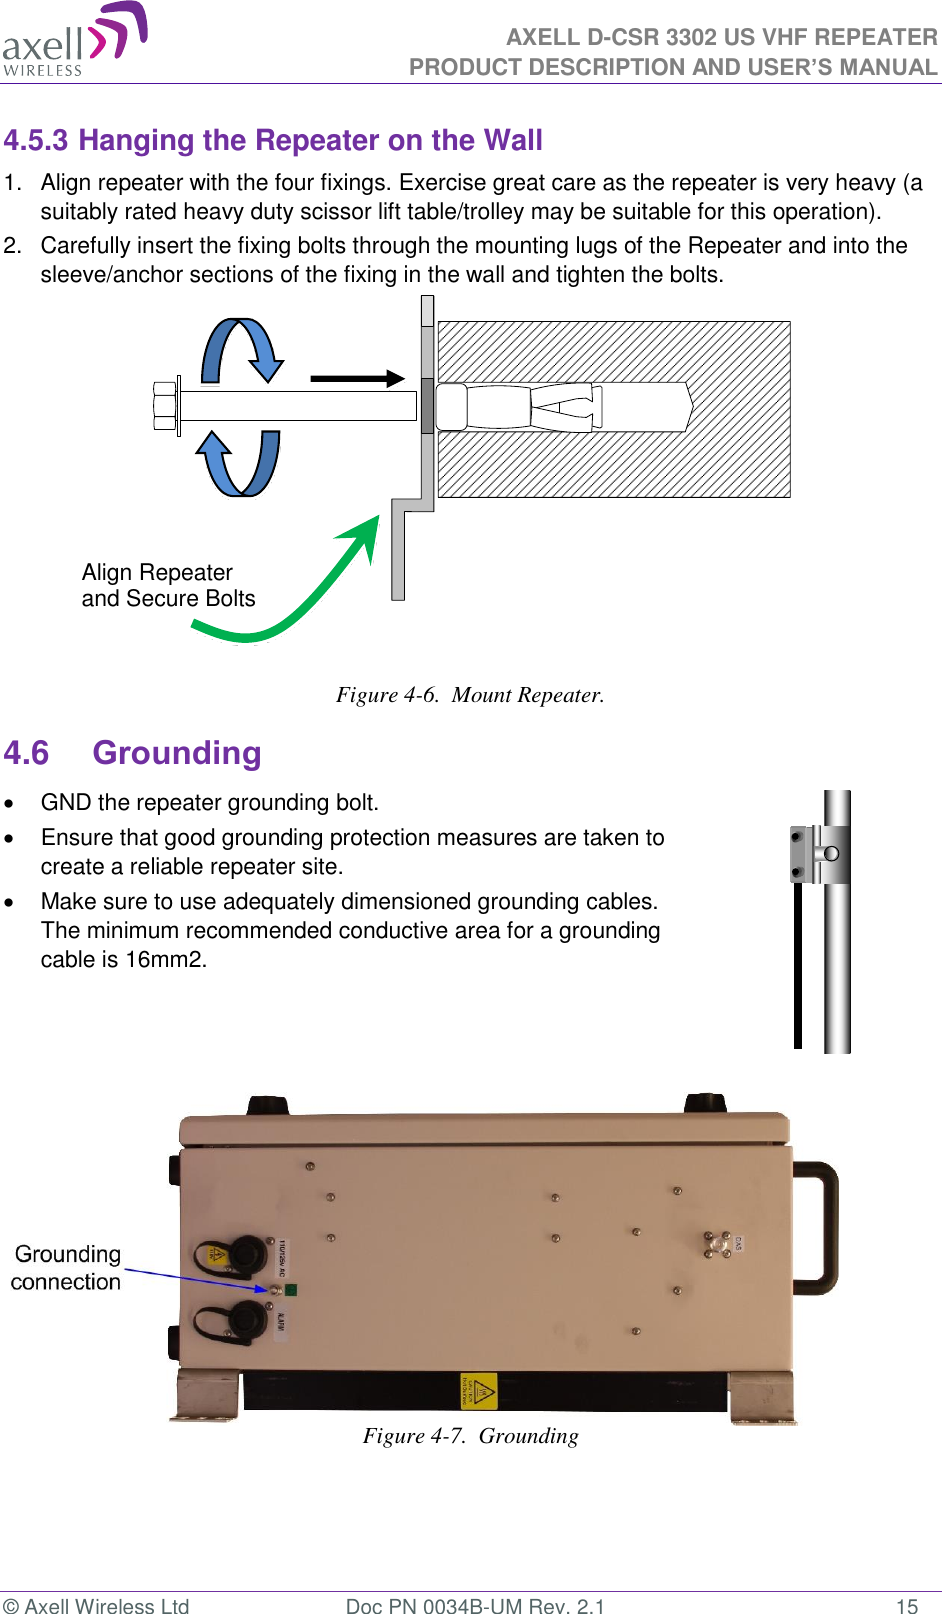 AXELL D-CSR 3302 US VHF REPEATER PRODUCT DESCRIPTION AND USER’S MANUAL  © Axell Wireless Ltd  Doc PN 0034B-UM Rev. 2.1  15 4.5.3 Hanging the Repeater on the Wall 1.  Align repeater with the four fixings. Exercise great care as the repeater is very heavy (a suitably rated heavy duty scissor lift table/trolley may be suitable for this operation).  2.   Carefully insert the fixing bolts through the mounting lugs of the Repeater and into the sleeve/anchor sections of the fixing in the wall and tighten the bolts.    Figure 4-6.  Mount Repeater. 4.6 Grounding   GND the repeater grounding bolt.   Ensure that good grounding protection measures are taken to create a reliable repeater site.    Make sure to use adequately dimensioned grounding cables. The minimum recommended conductive area for a grounding cable is 16mm2.         Figure 4-7.  Grounding  Align Repeater and Secure Bolts 